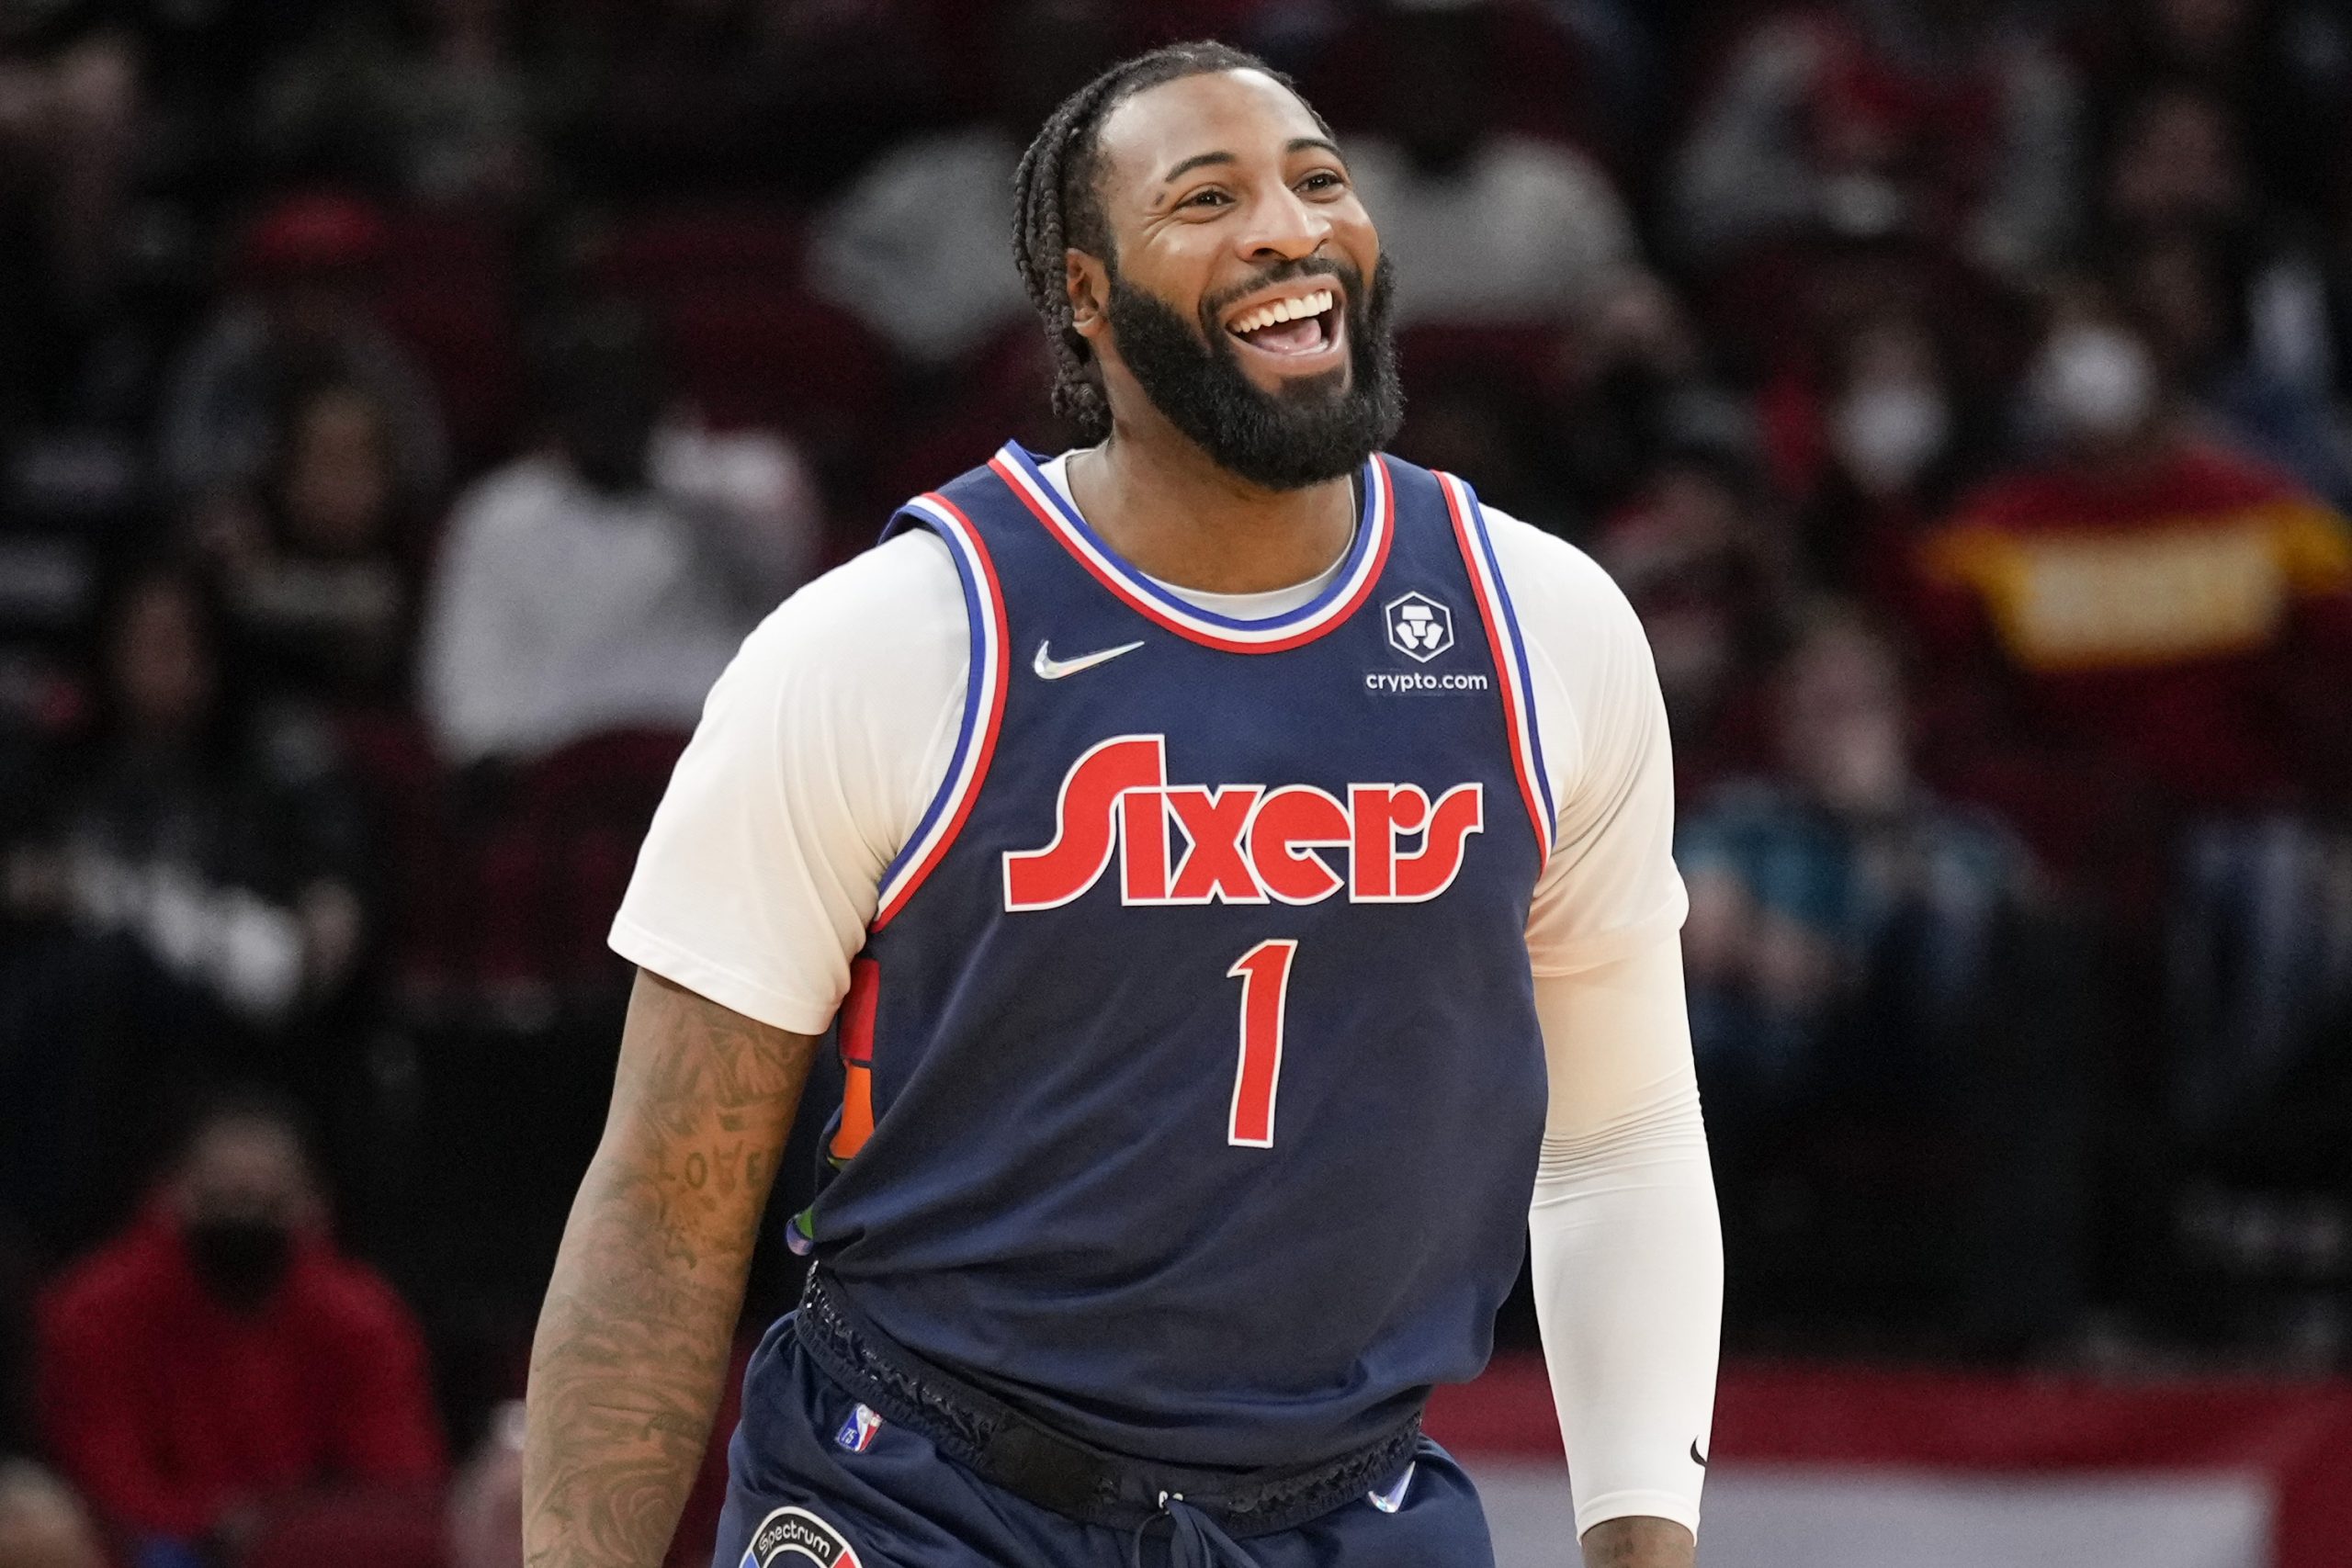 Philadelphia 76ers center Andre Drummond reacts after his dunk during the first half of an NBA basketball game against the Houston Rockets, Monday, Jan. 10, 2022, in Houston.